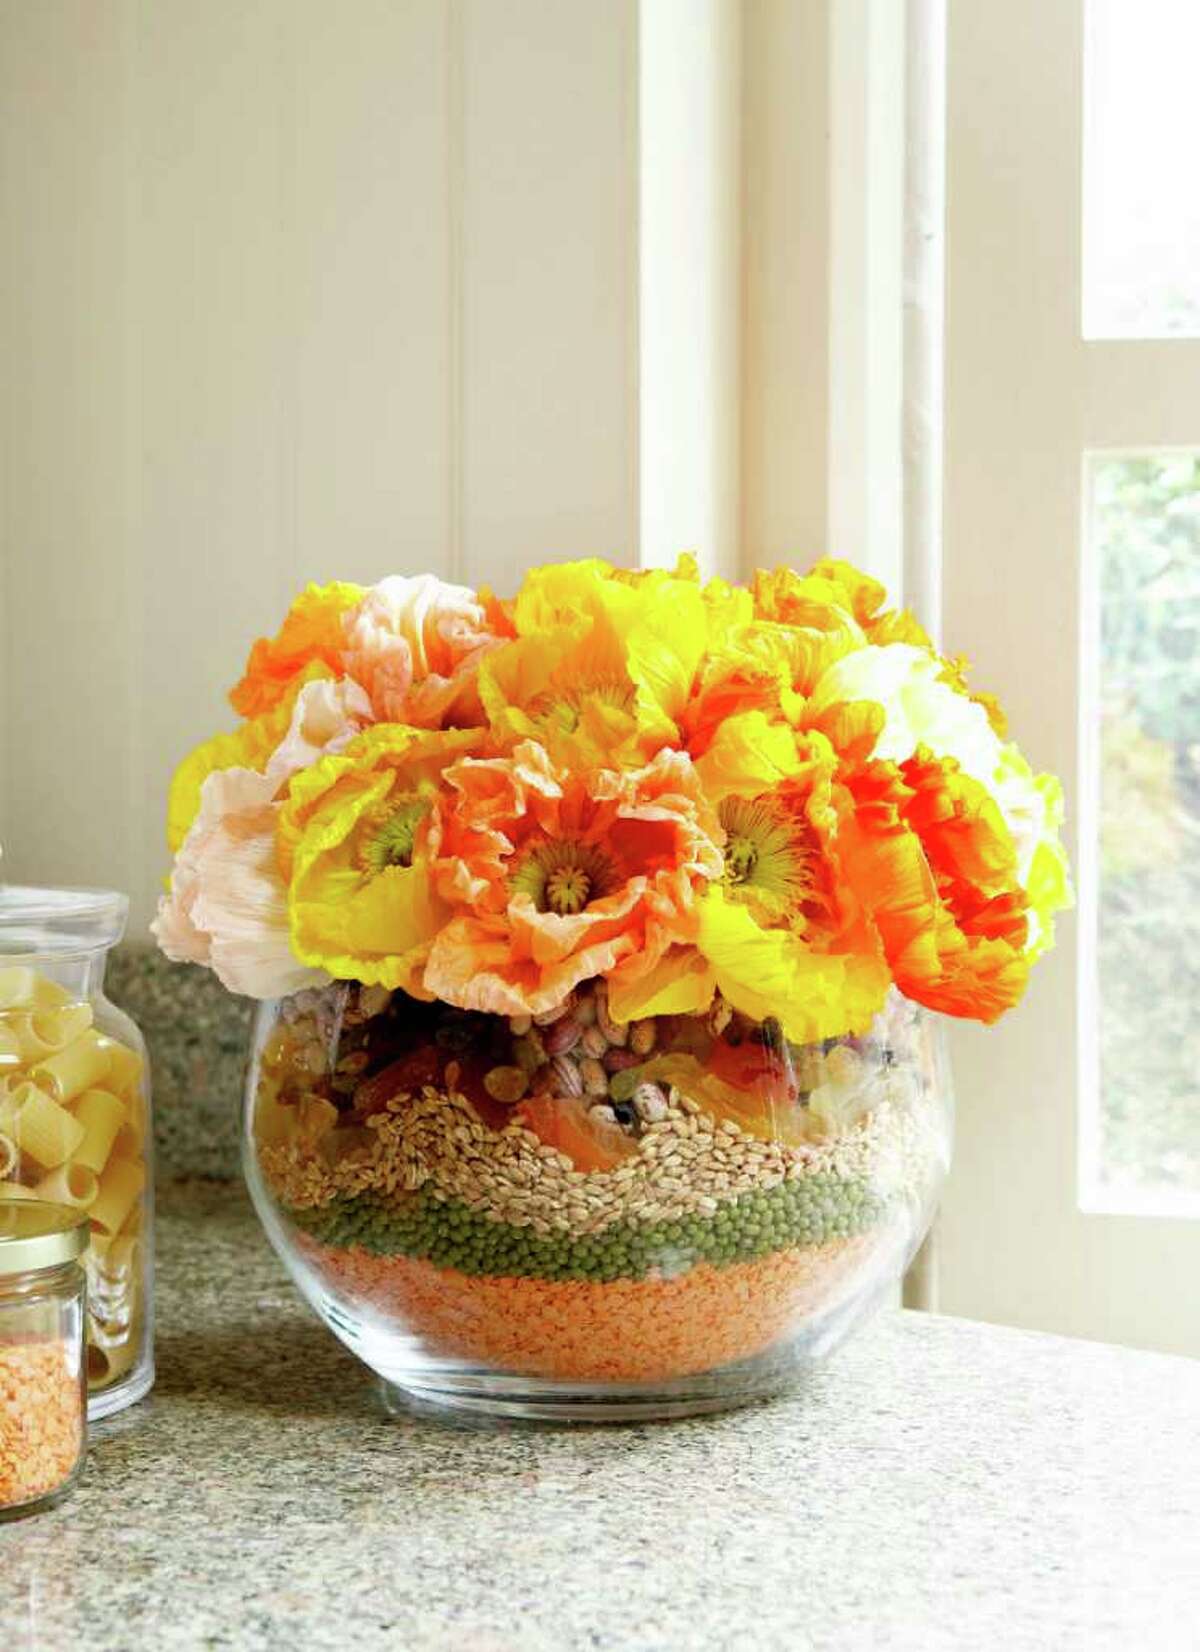 This bright arrangement is perfect for a countertop display.